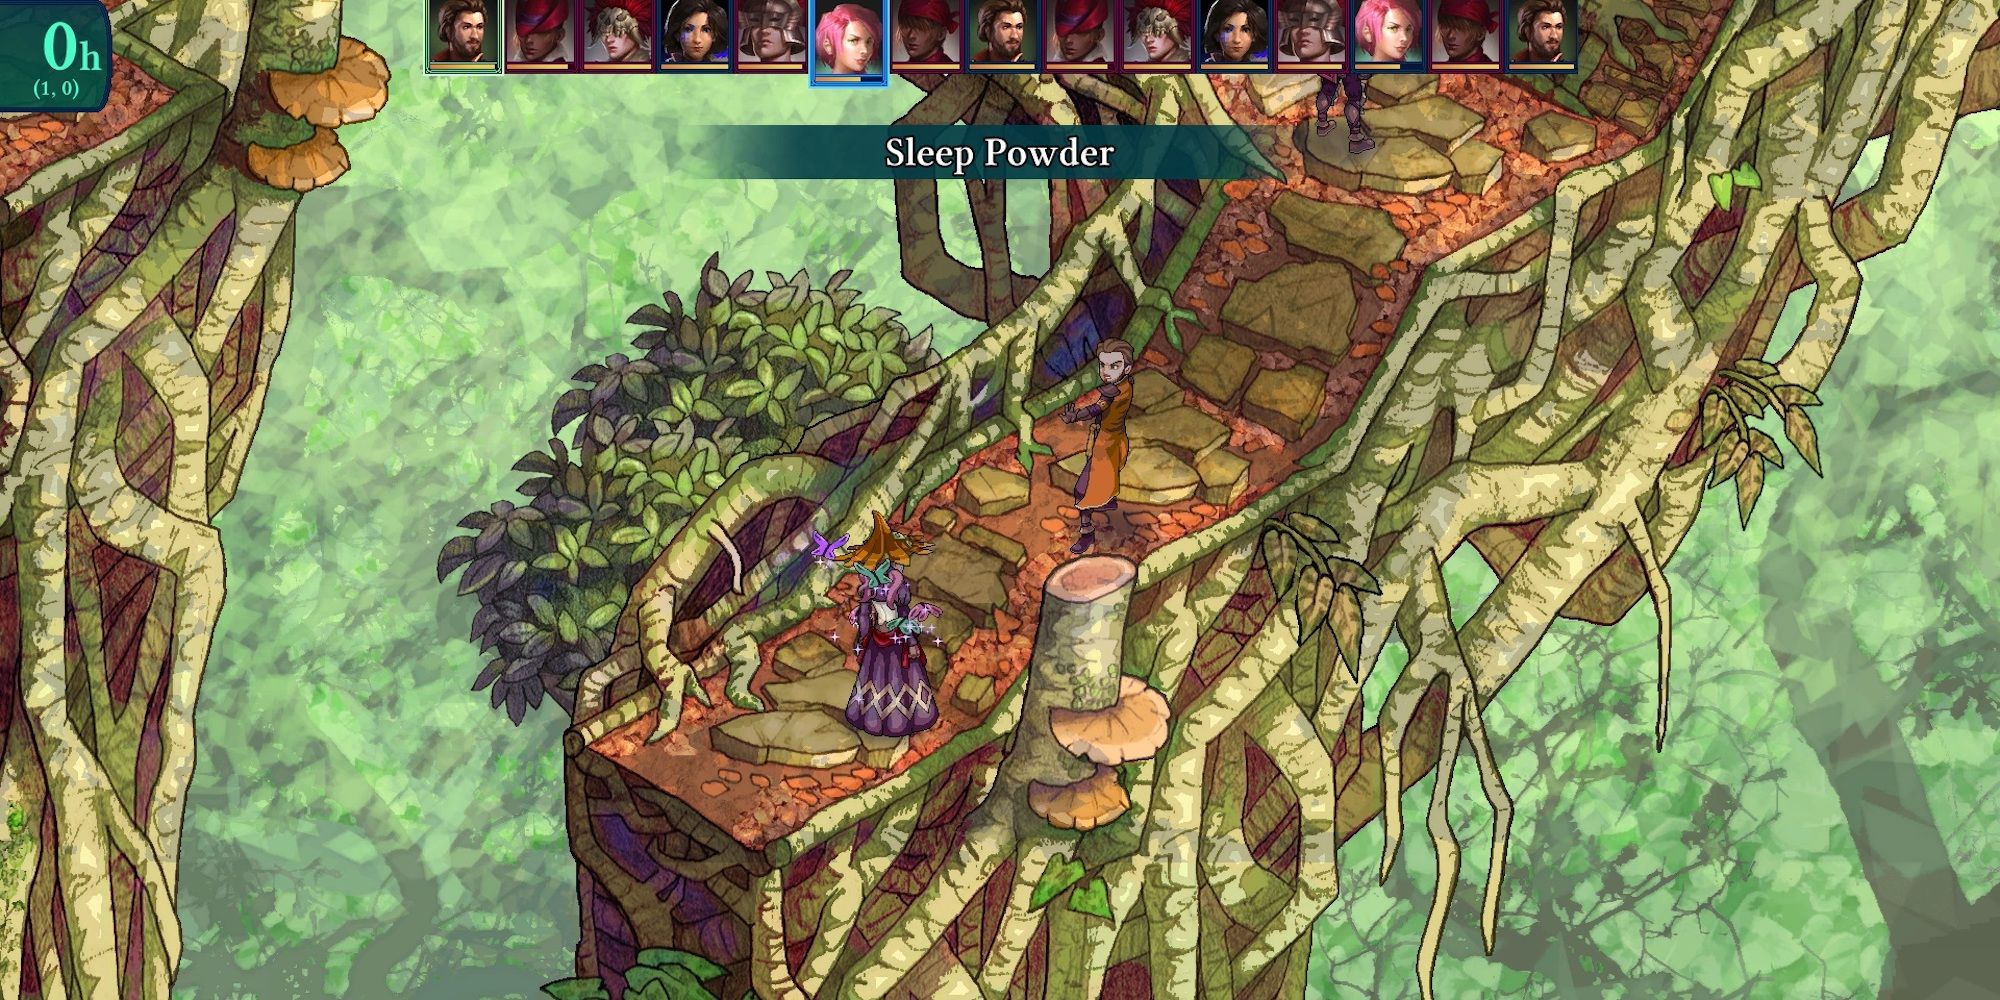 A screenshot from Fell Seal: Arbiter's Mark, showing a character casting sleeping spells on an enemy in a lush forest